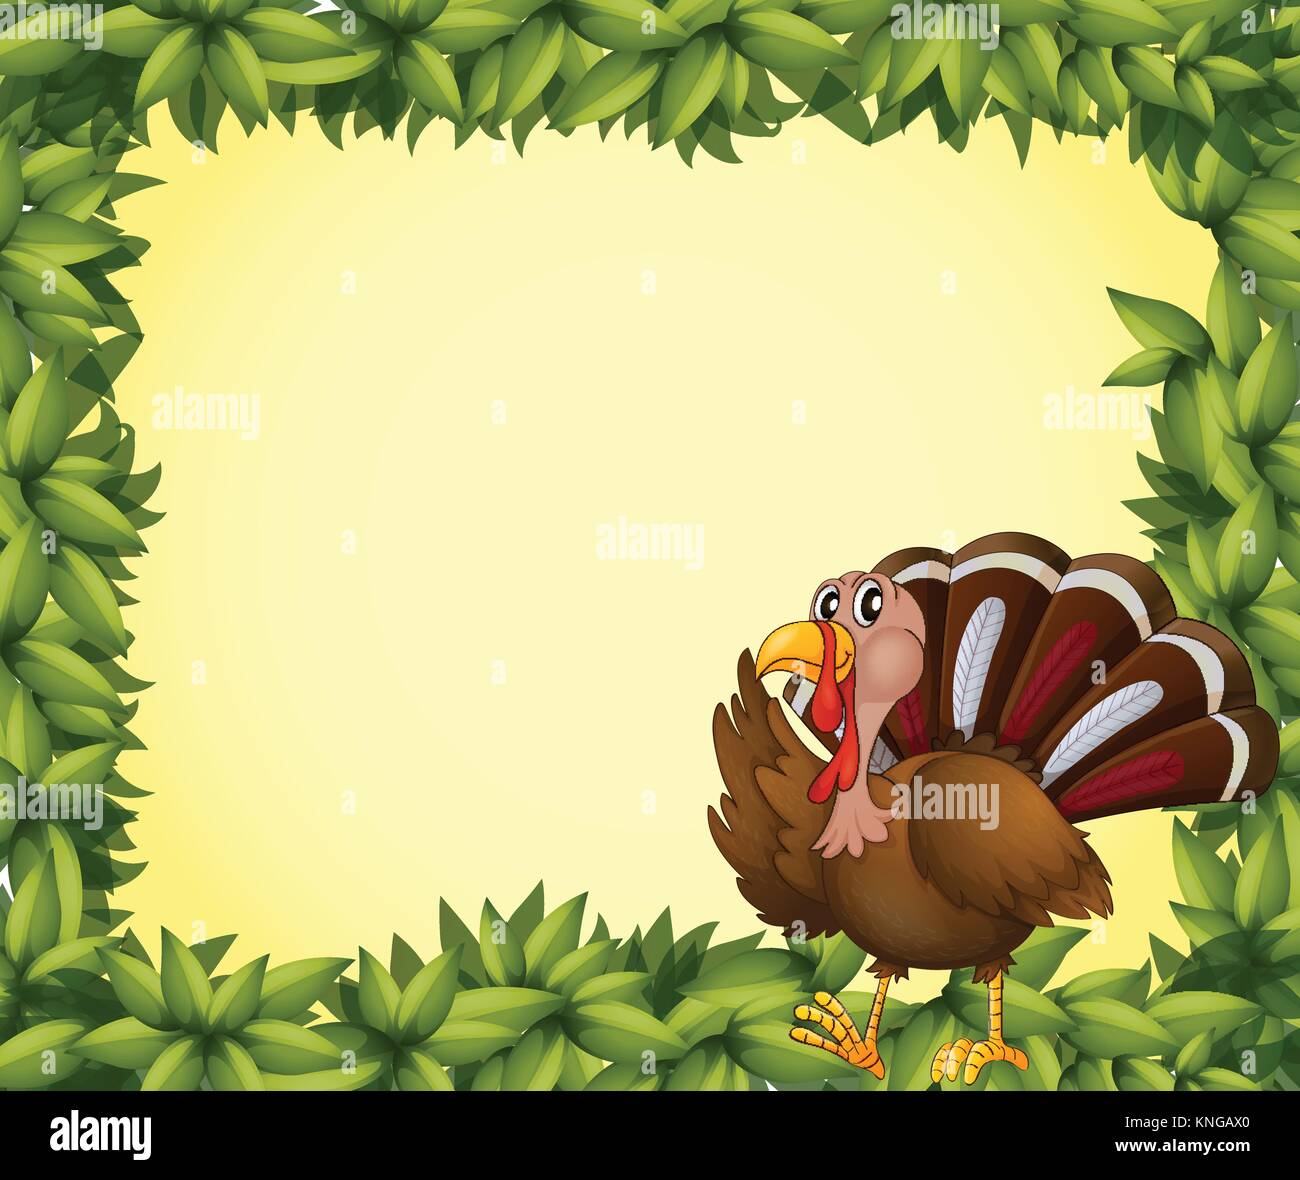 Illustration of a turkey on a leafy frame Stock Vector